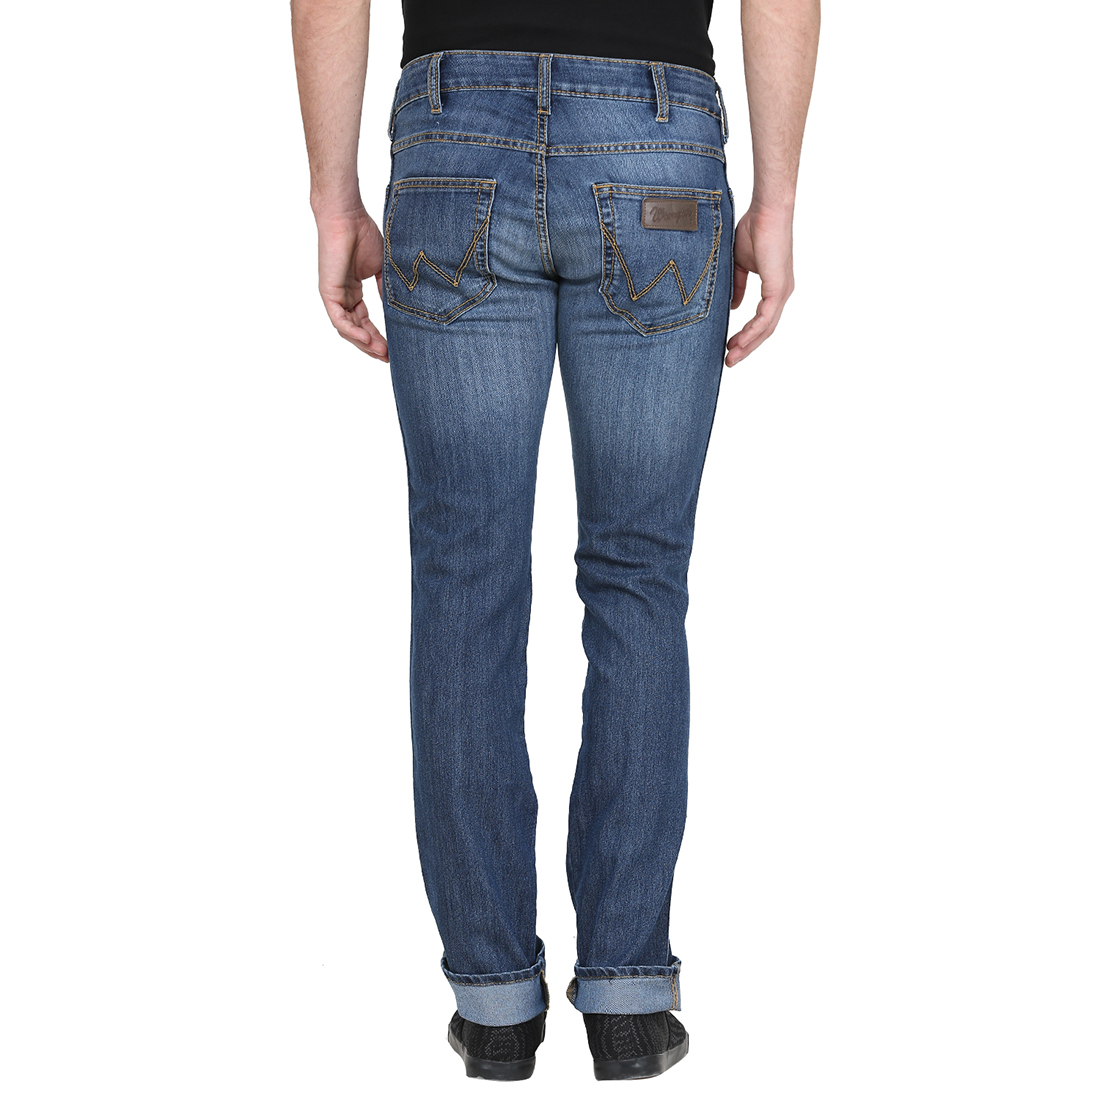 Buy Wrangler Blue Casual Cotton Jeans for Men Online @ ₹1437 from ShopClues